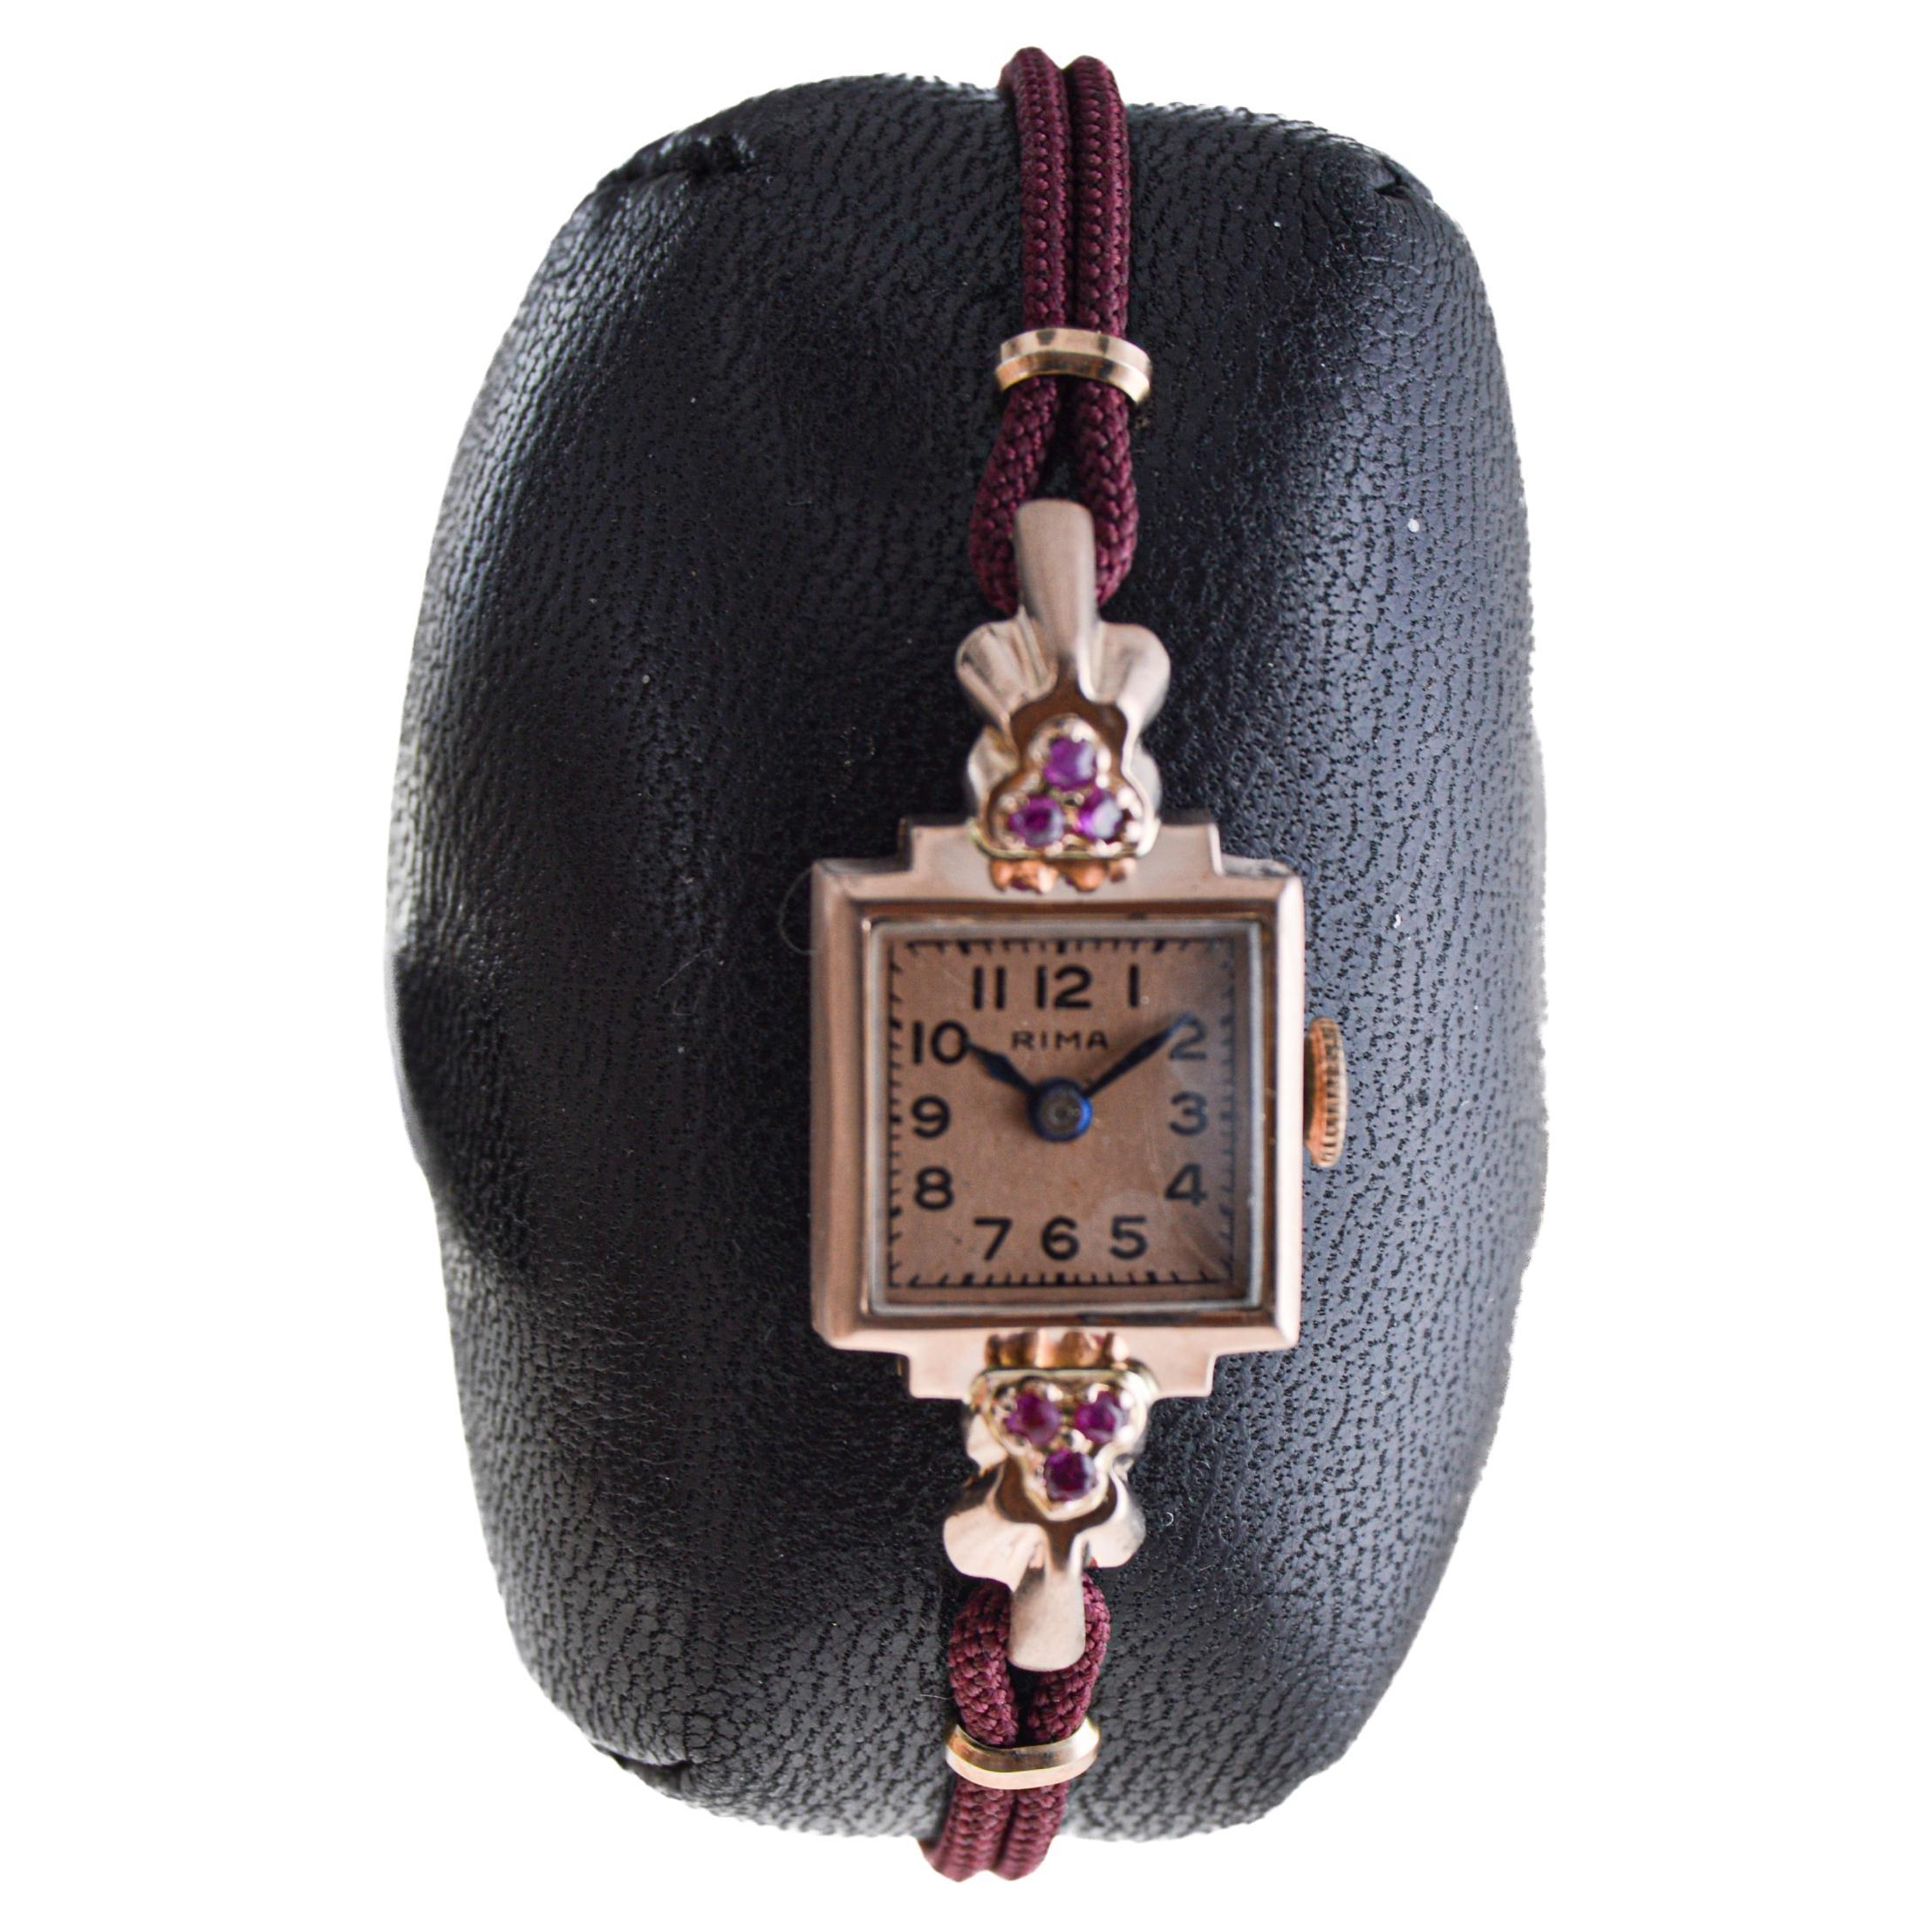 Rima Ladies 14Kt Solid Rose Gold Art Deco Ladies Watch with Ruby Accents 1940's